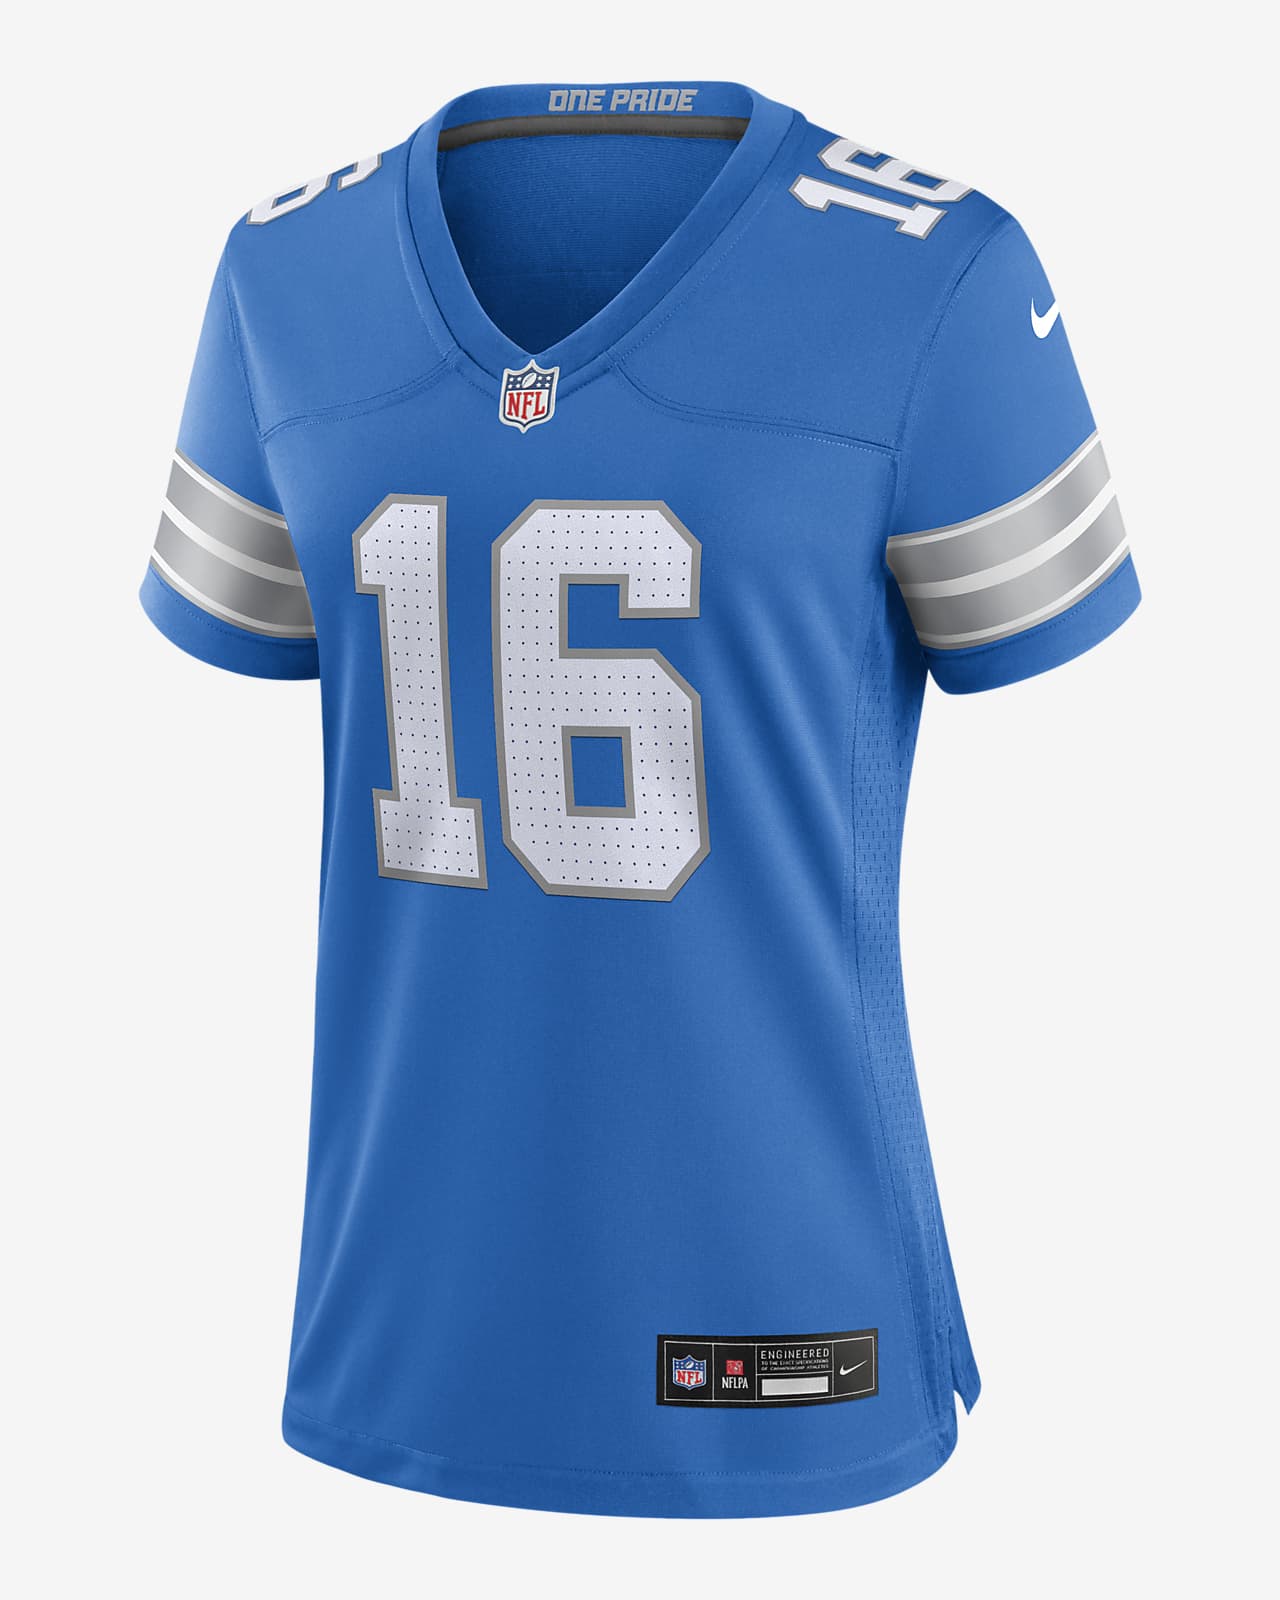 Jared Goff Detroit Lions Women's Nike NFL Game Football Jersey